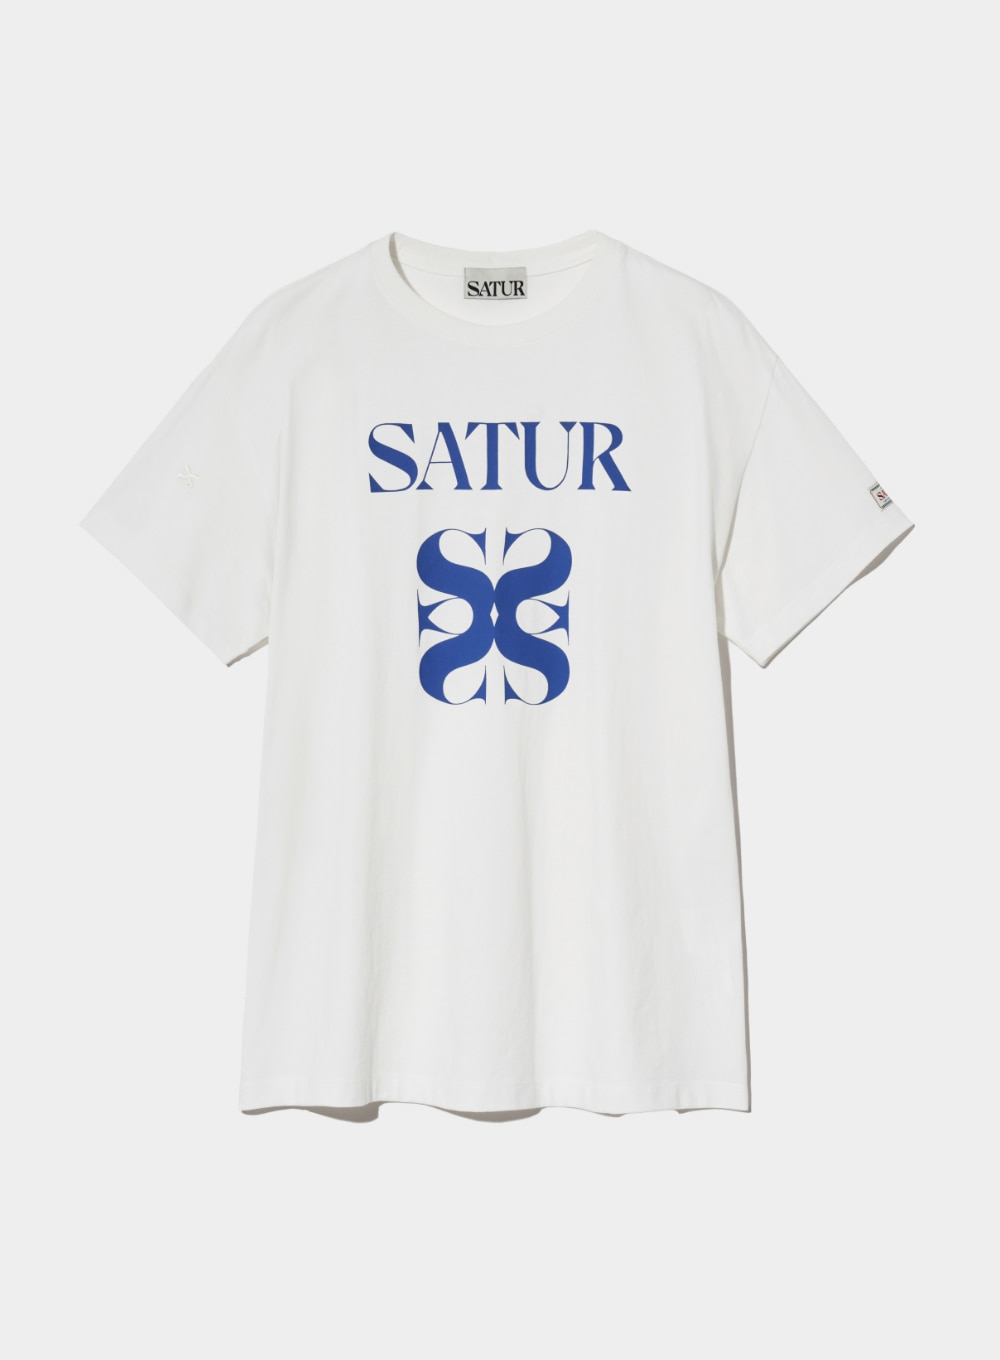 (W) Satur All Day T-Shirt - White Blue